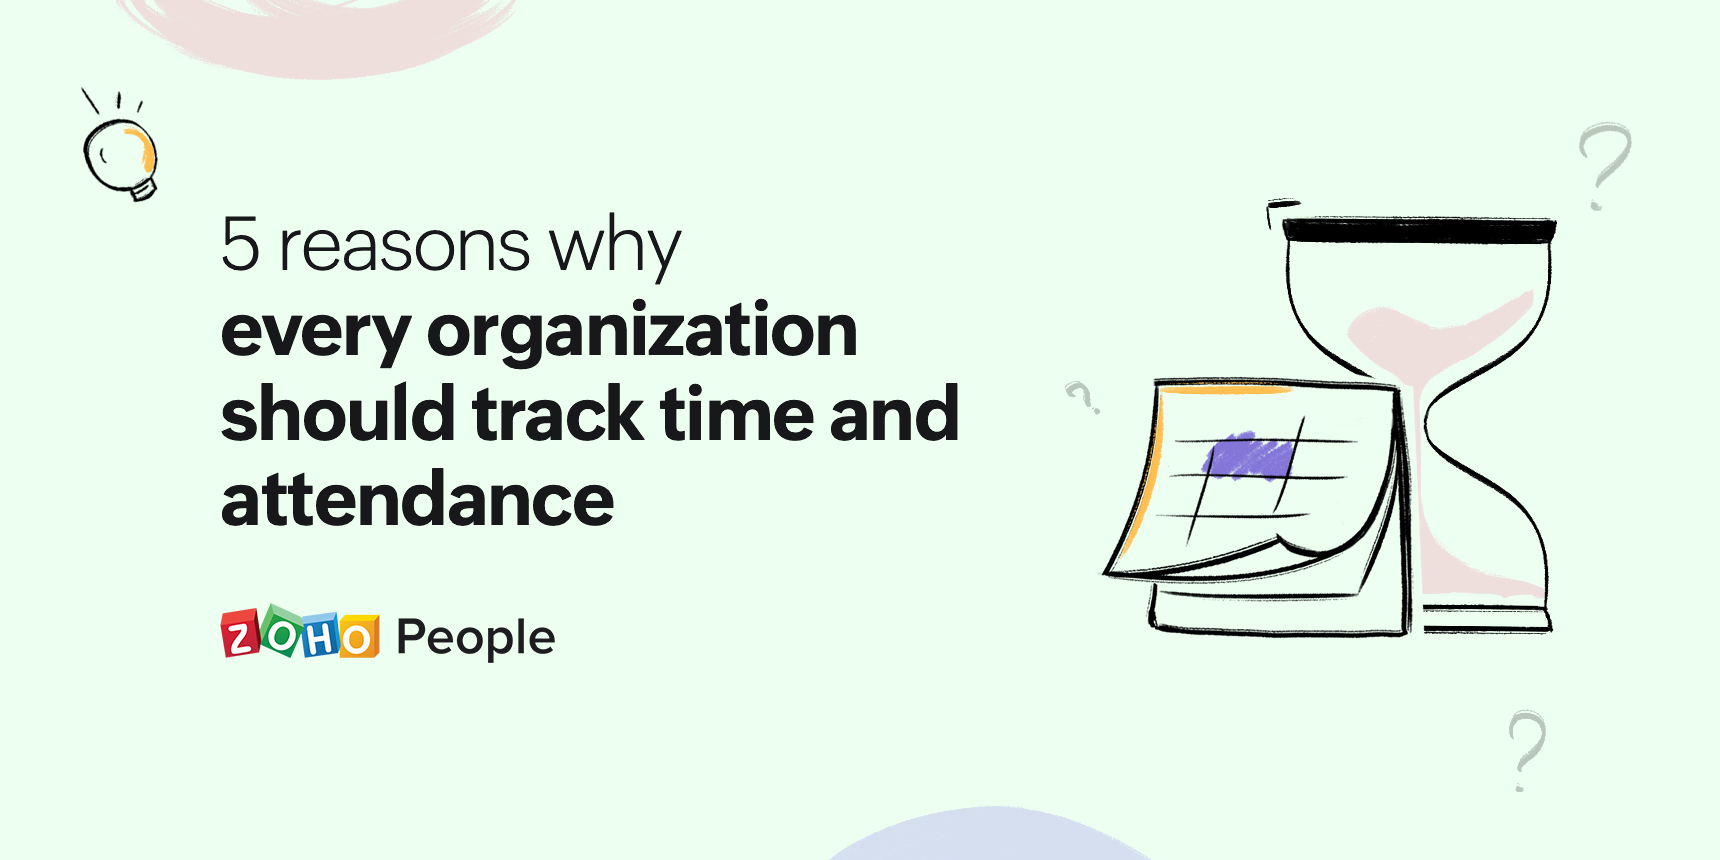 5 Reasons why every organization should track time and attendance